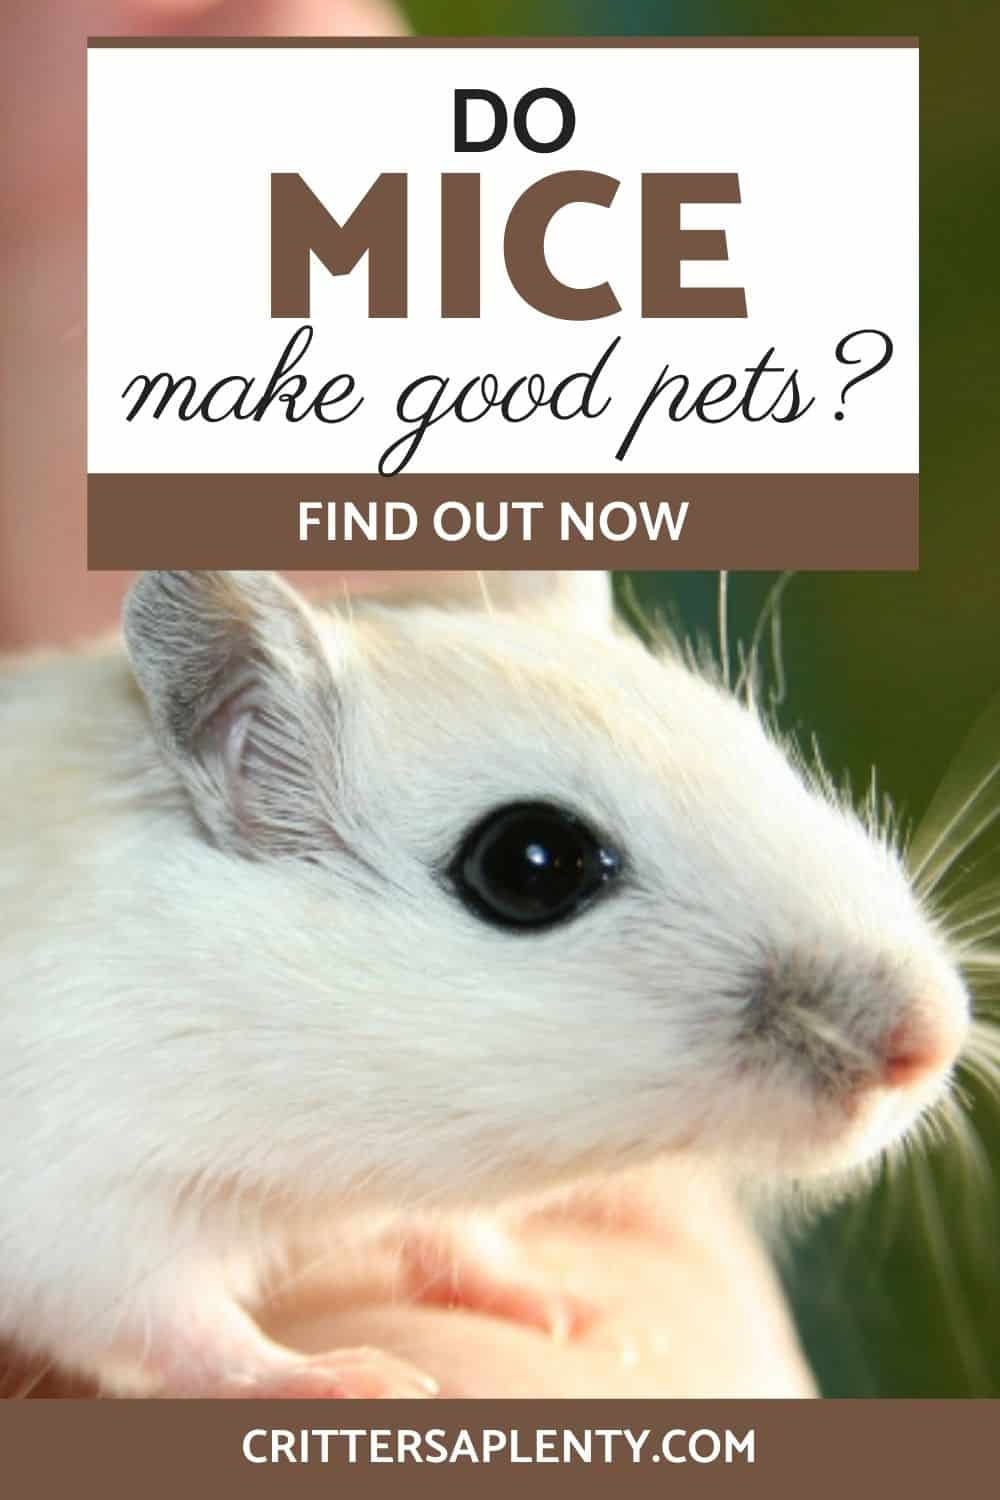 We think pet mice make excellent pets for children and adults alike. They are adorable, affectionate, and easy to care for as they are not demanding. Read on to discover why mice make excellent pets. You will also learn how to choose and take care of your pets, including how to feed, house, keep them active, and lots more. via @crittersaplenty